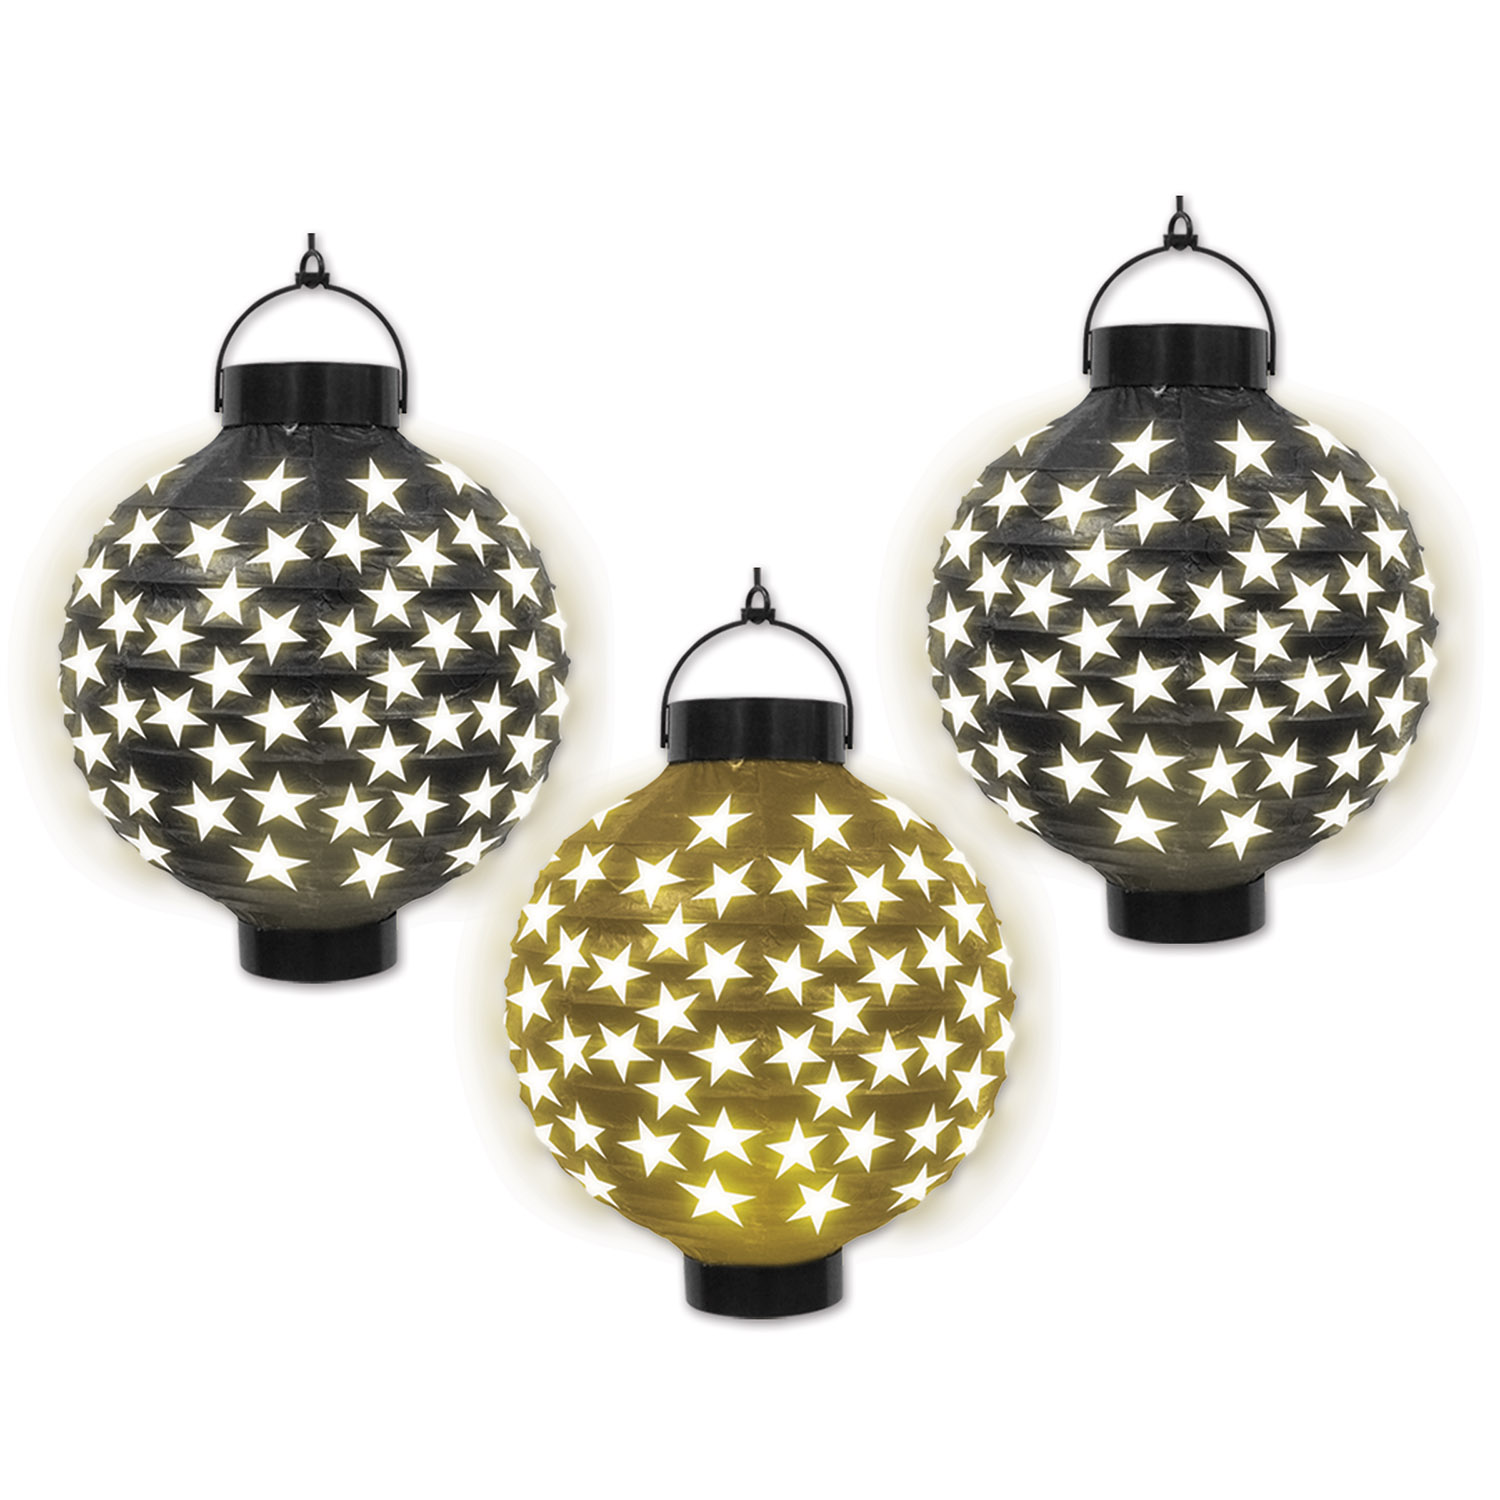 Light-up paper lanterns in black and gold with white stars 